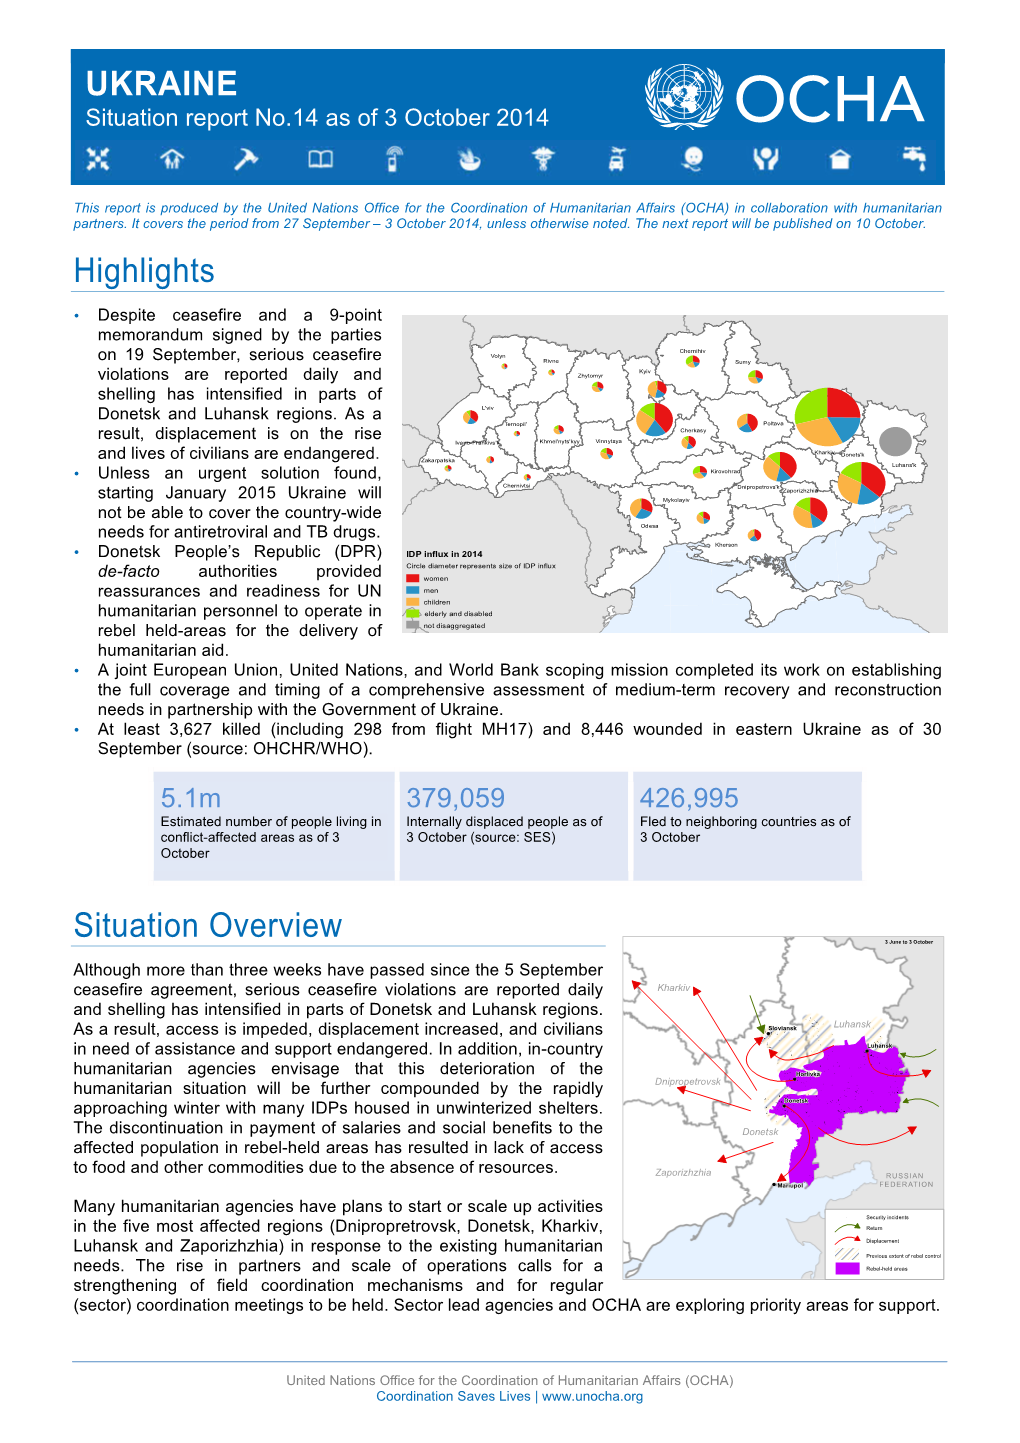 UKRAINE Situation Report No.14 As of 3 October 2014